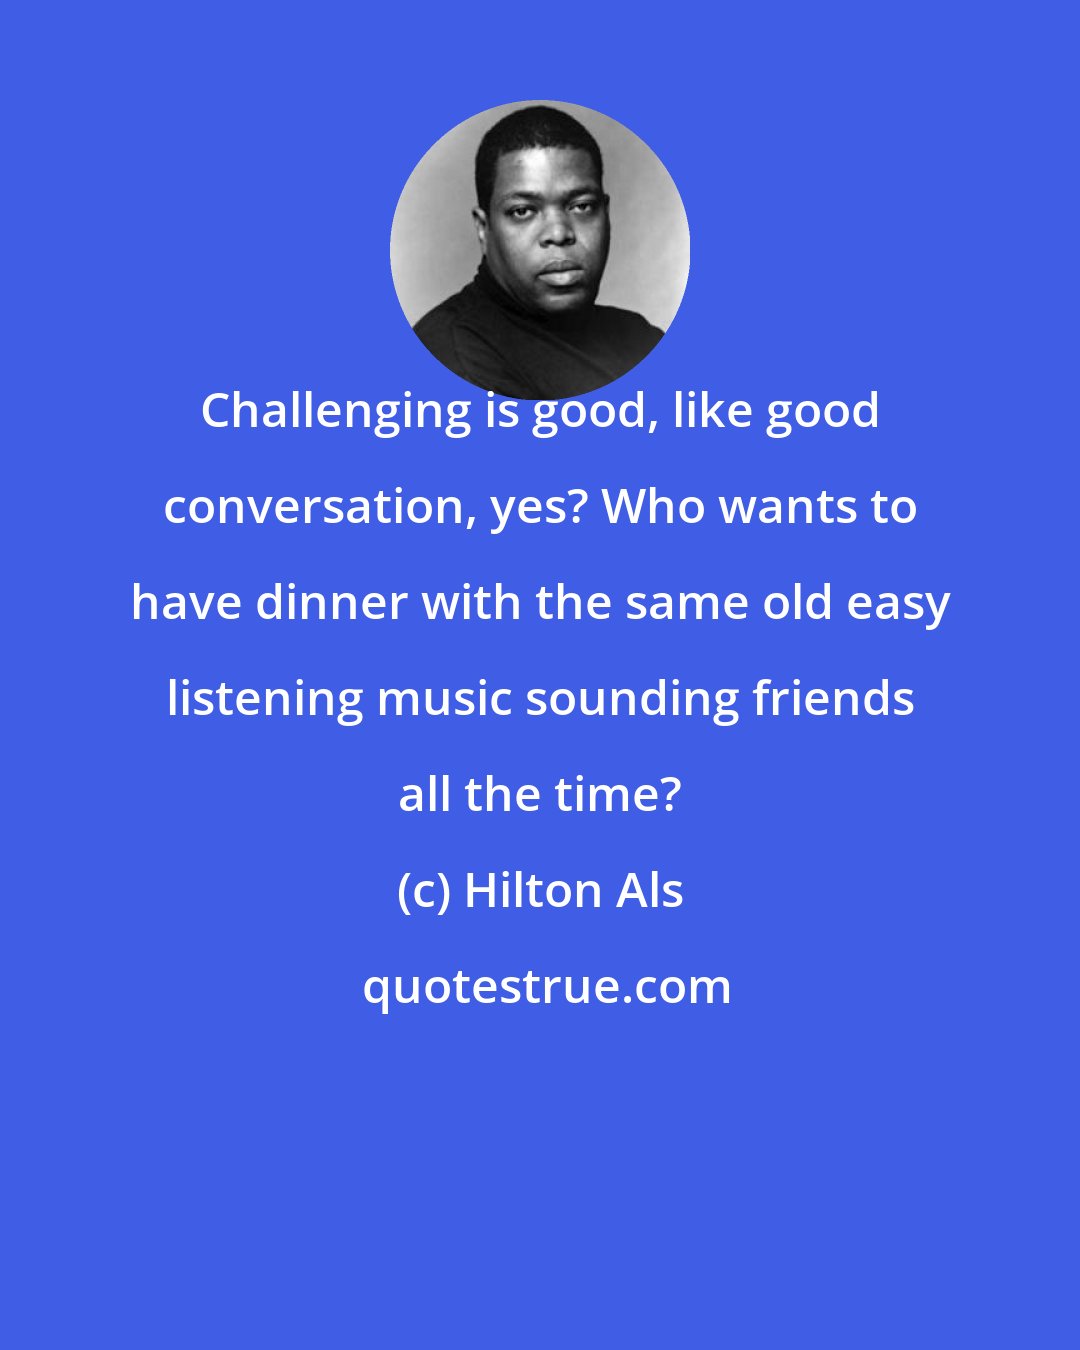 Hilton Als: Challenging is good, like good conversation, yes? Who wants to have dinner with the same old easy listening music sounding friends all the time?